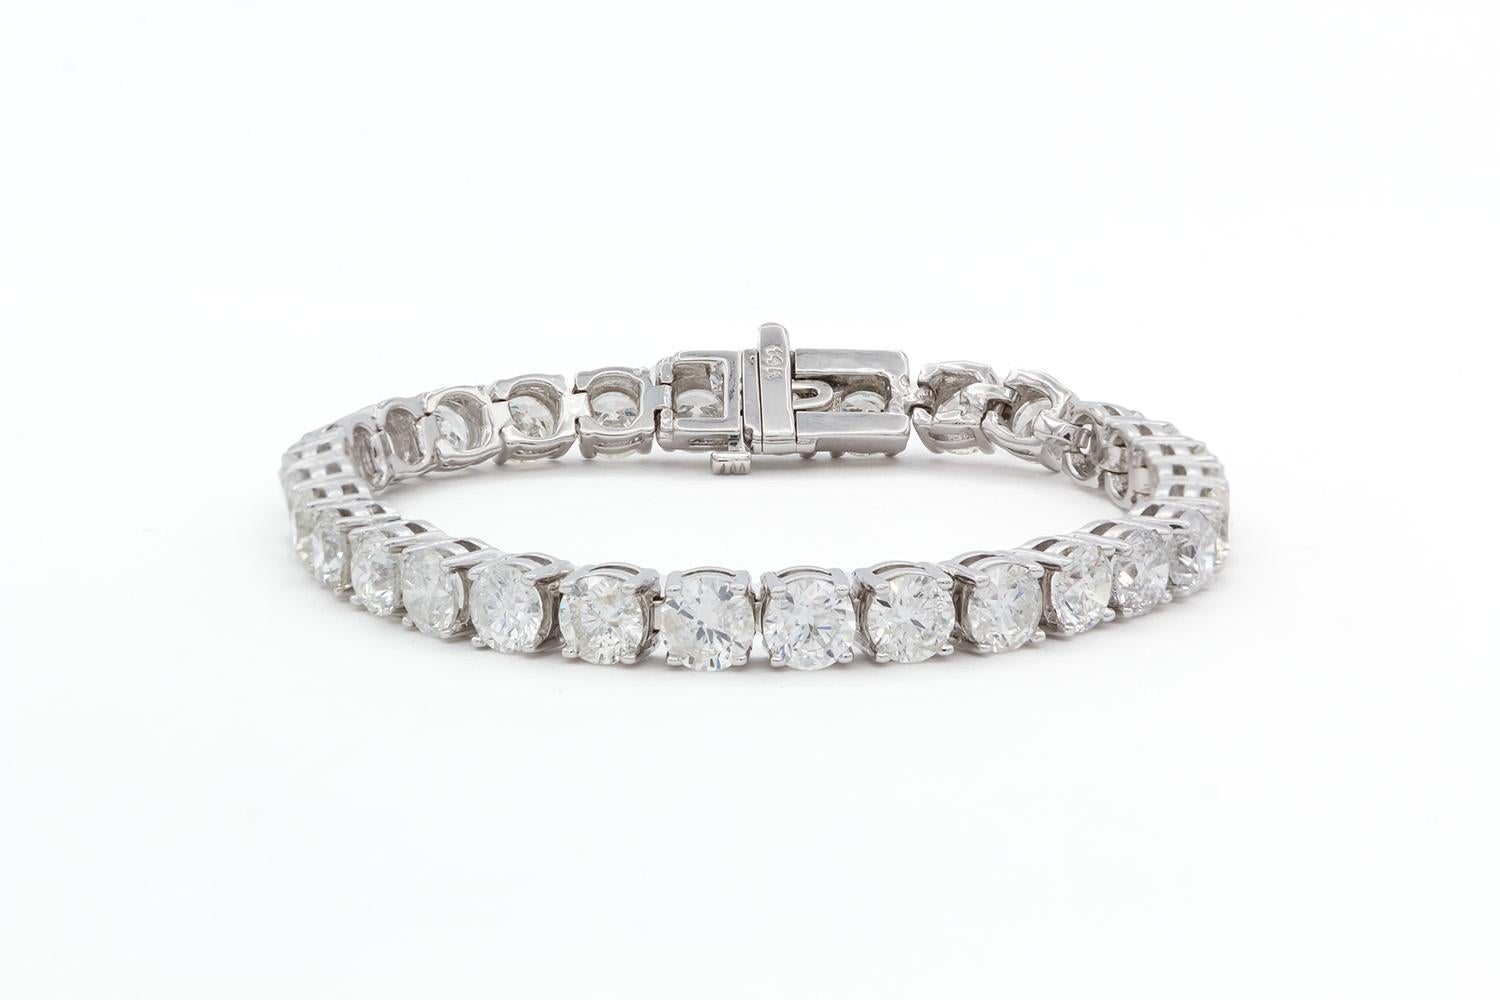 We are pleased to present this beautiful 14k White Gold & Diamond Tennis Bracelet. It features 30 round brilliant cut diamonds graduating in size from 0.50ct to 0.70ct. The total carat weight of the bracelet is 18.90ctw and the diamonds have a color